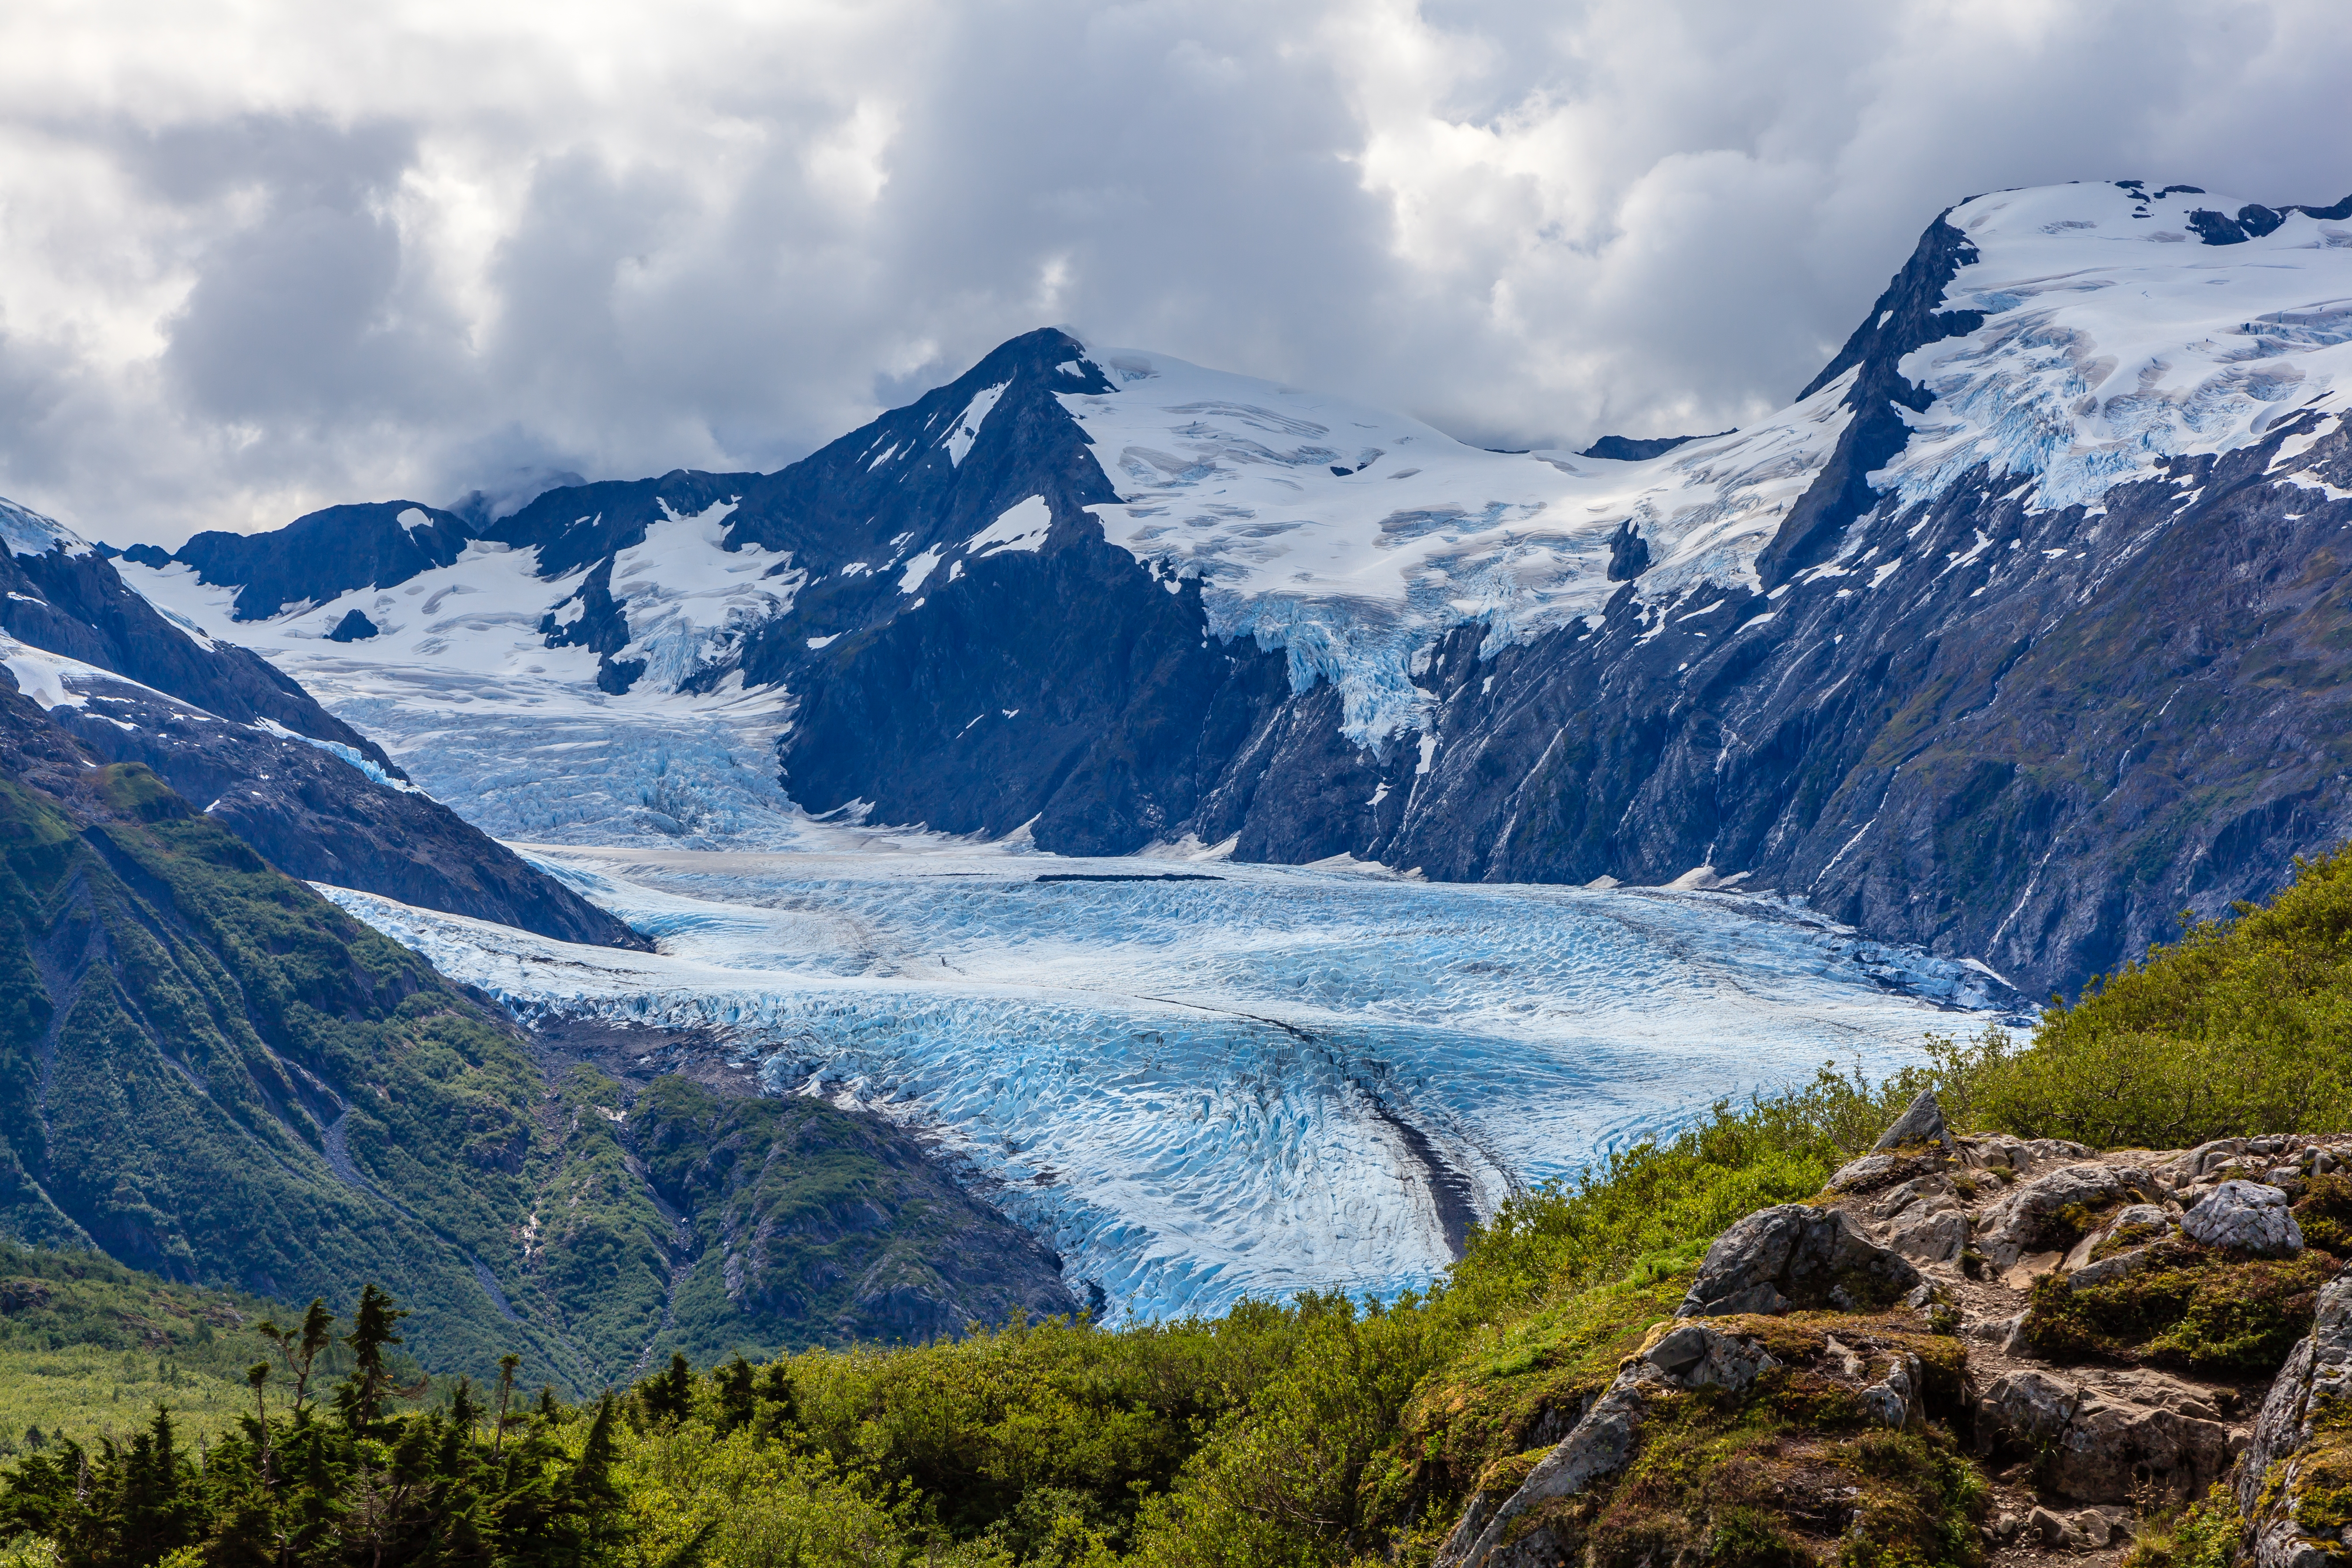 Portage Glacier surrounded by lush greenery and blue mountains